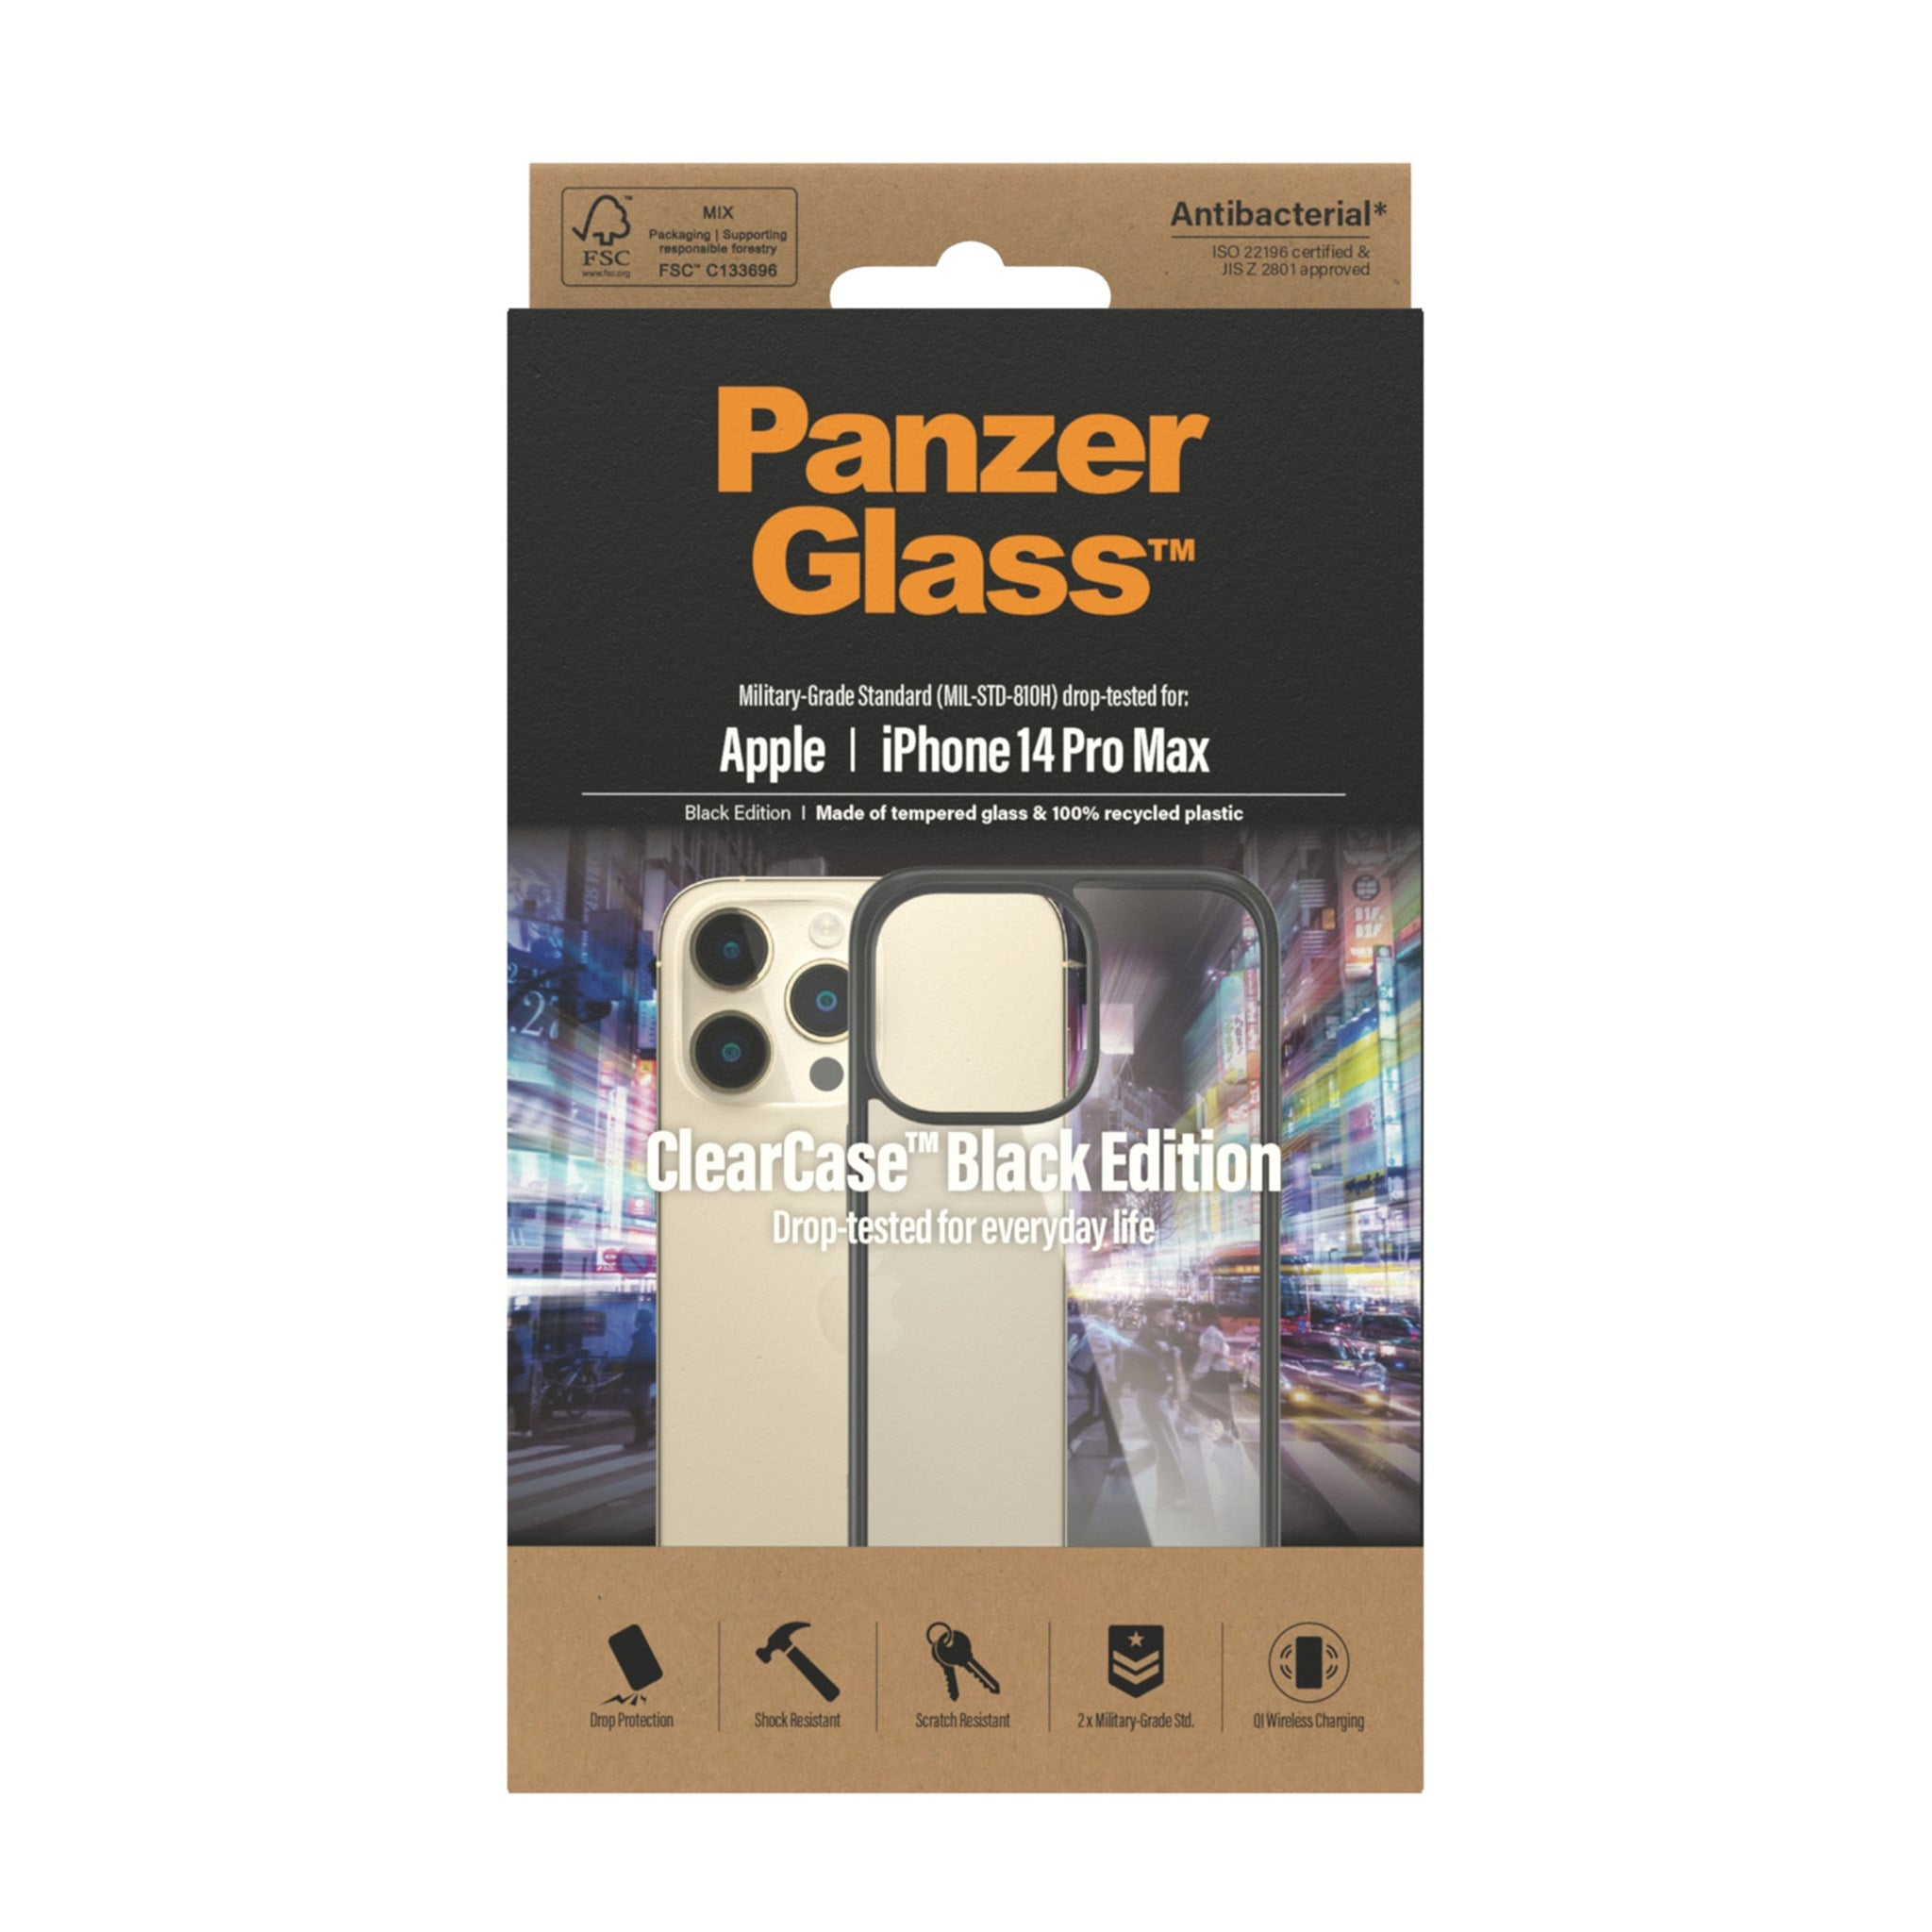 PANZERGLASS ClearCase, Transparent 14 iPhone Backcover, Apple, Max, Pro